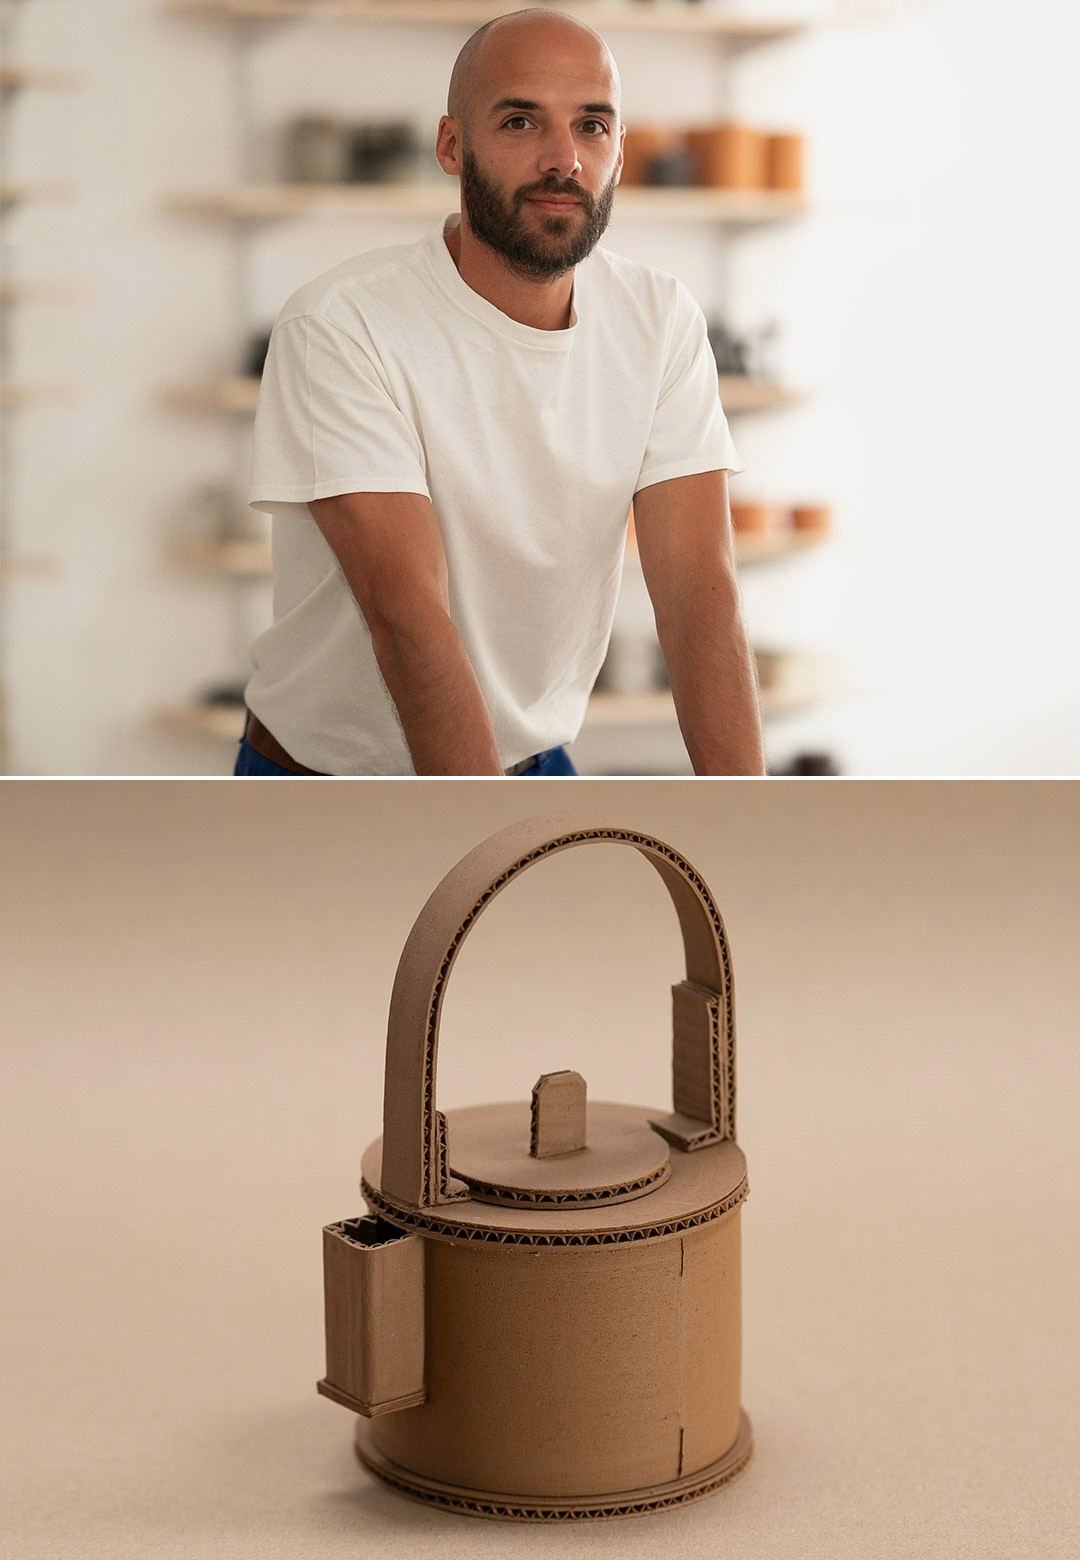 ‘Cardboard’ by Jacques Monneraud mimics everyday objects through ceramic art